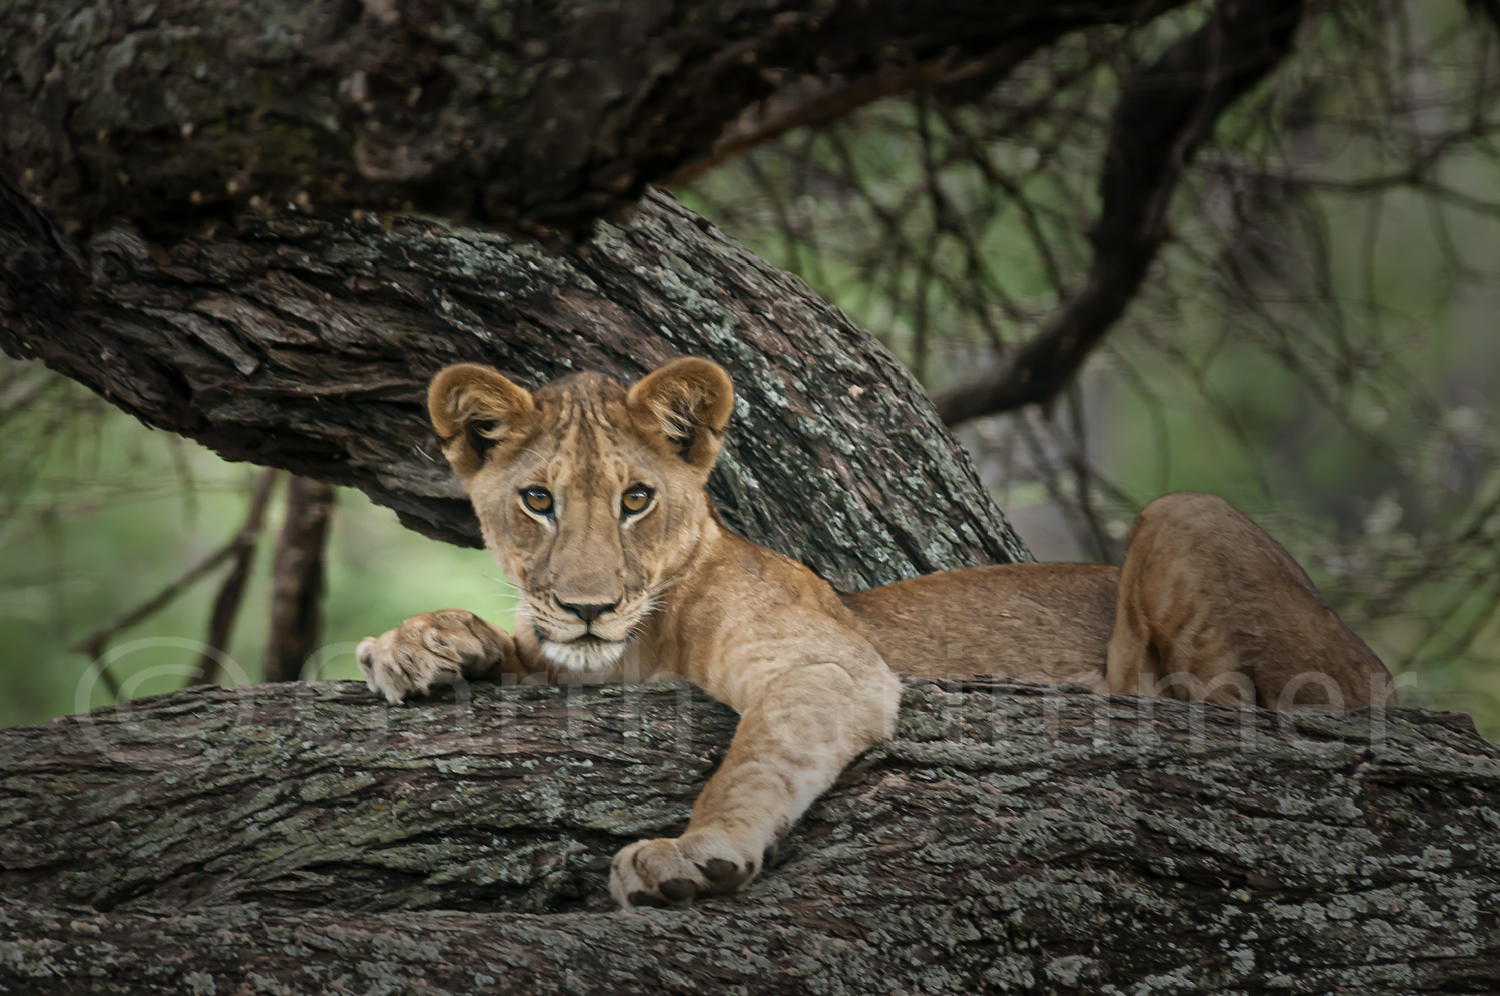 Lioness in tree